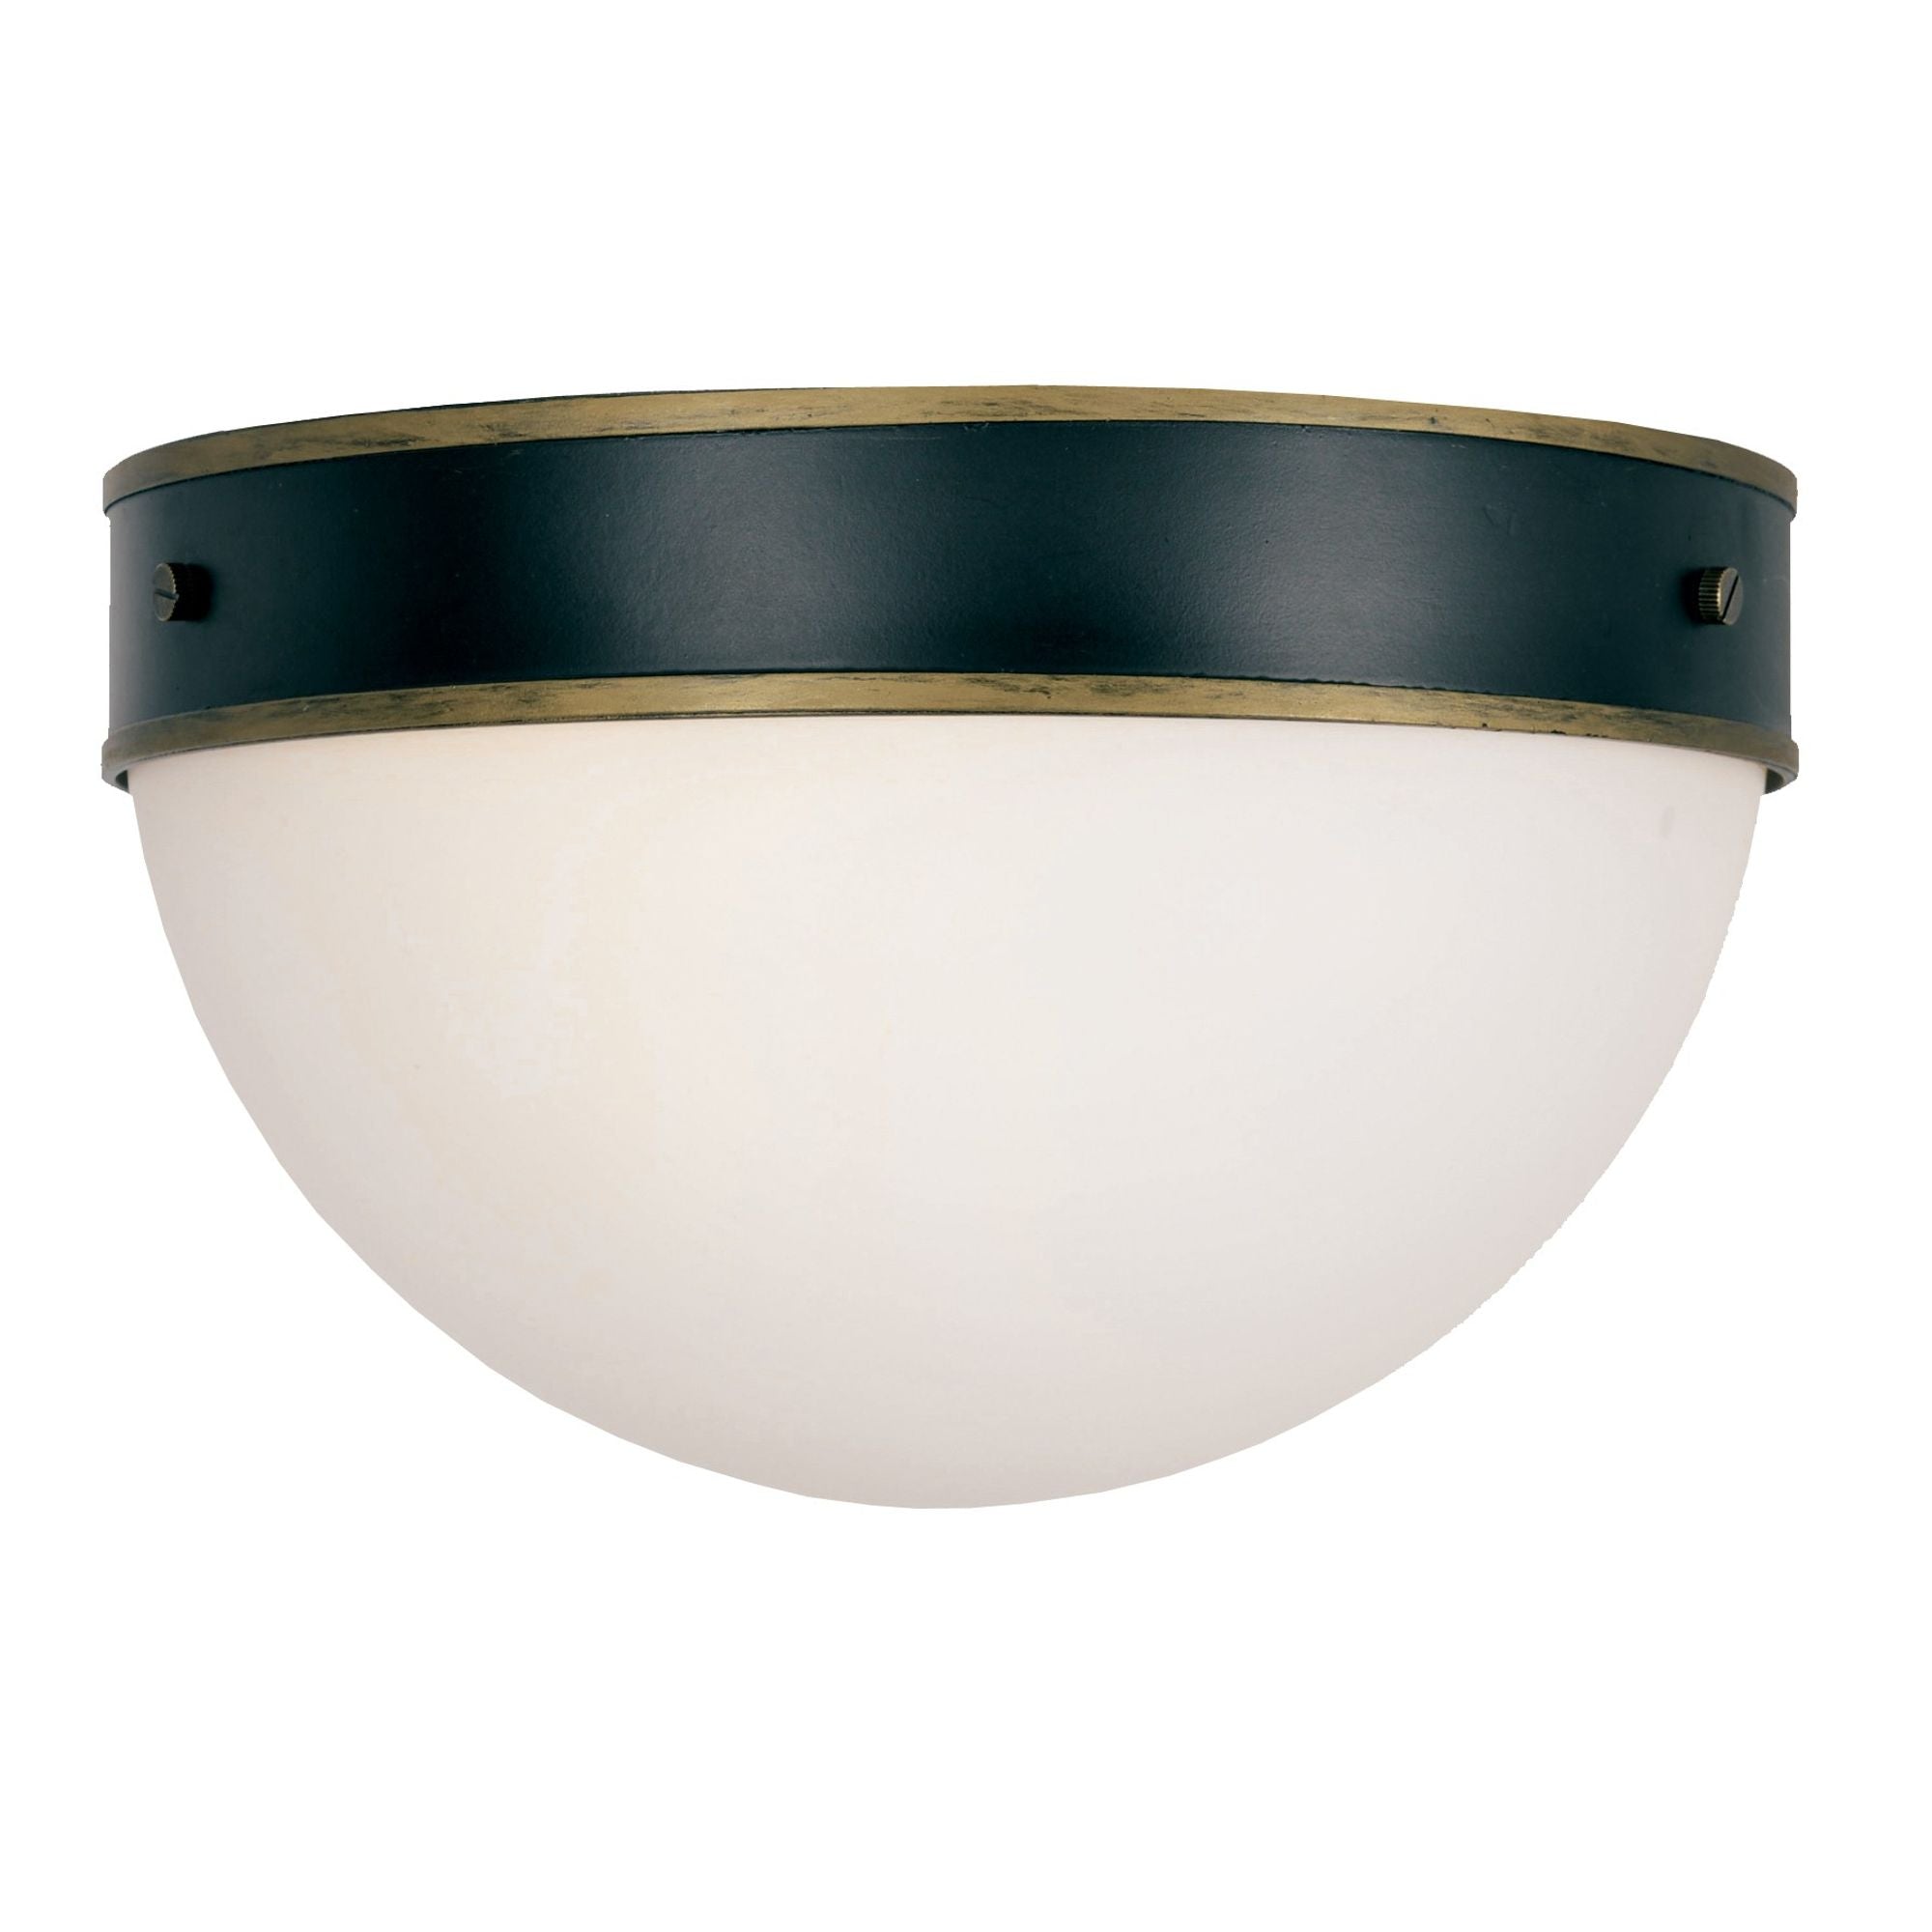 Brian Patrick Flynn for Crystorama Capsule 2 Light Matte Black + Textured Gold Outdoor Ceiling Mount